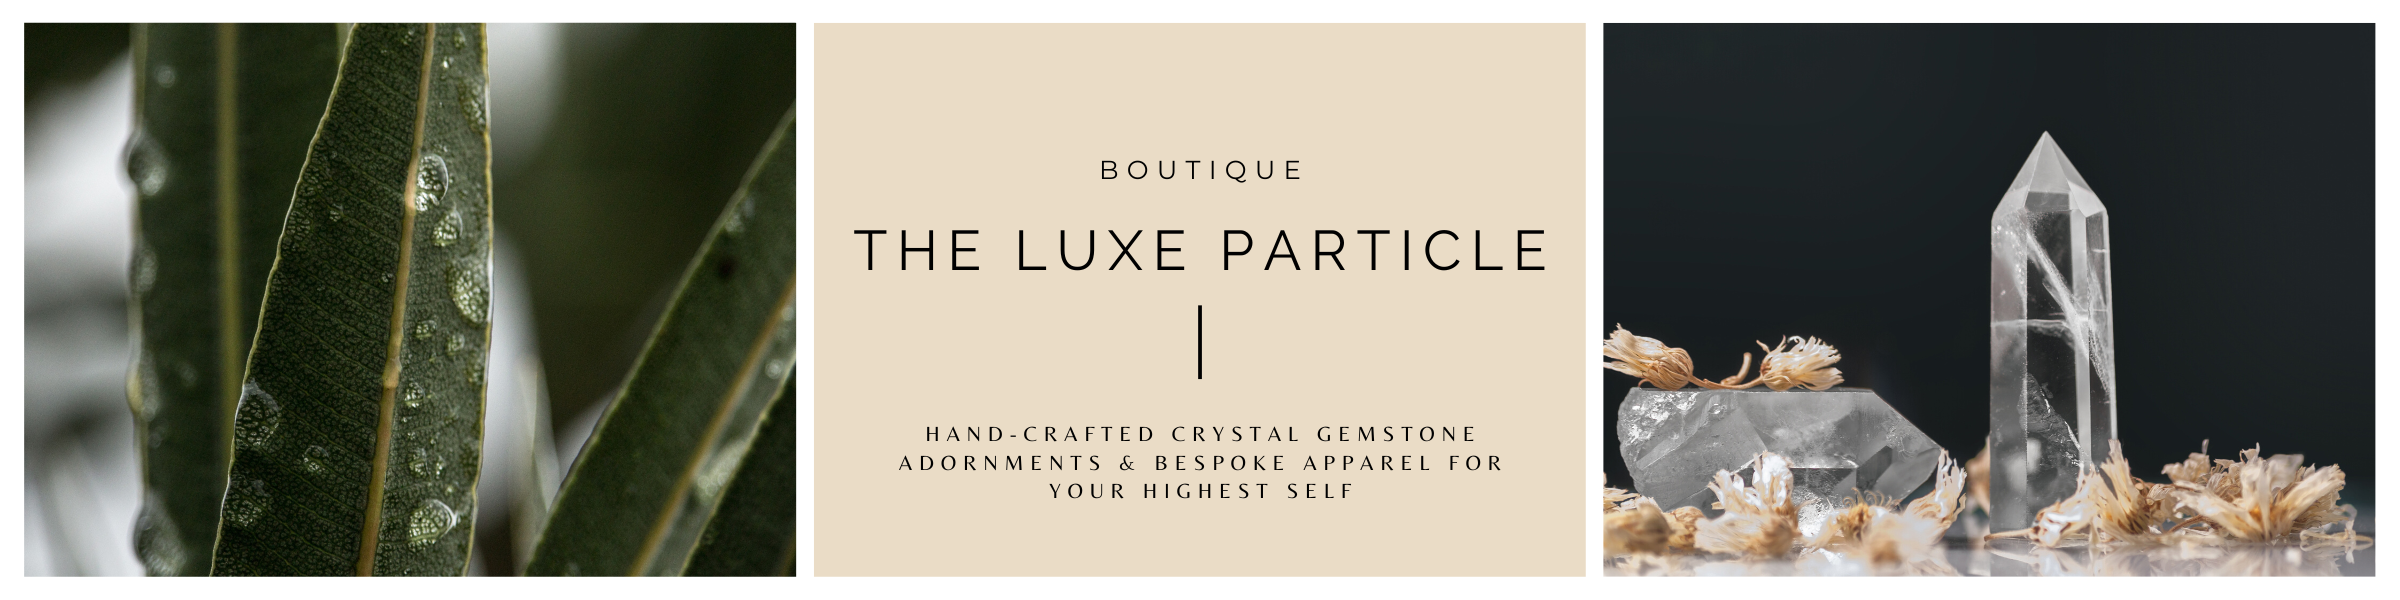 The Luxe Particle Boutique